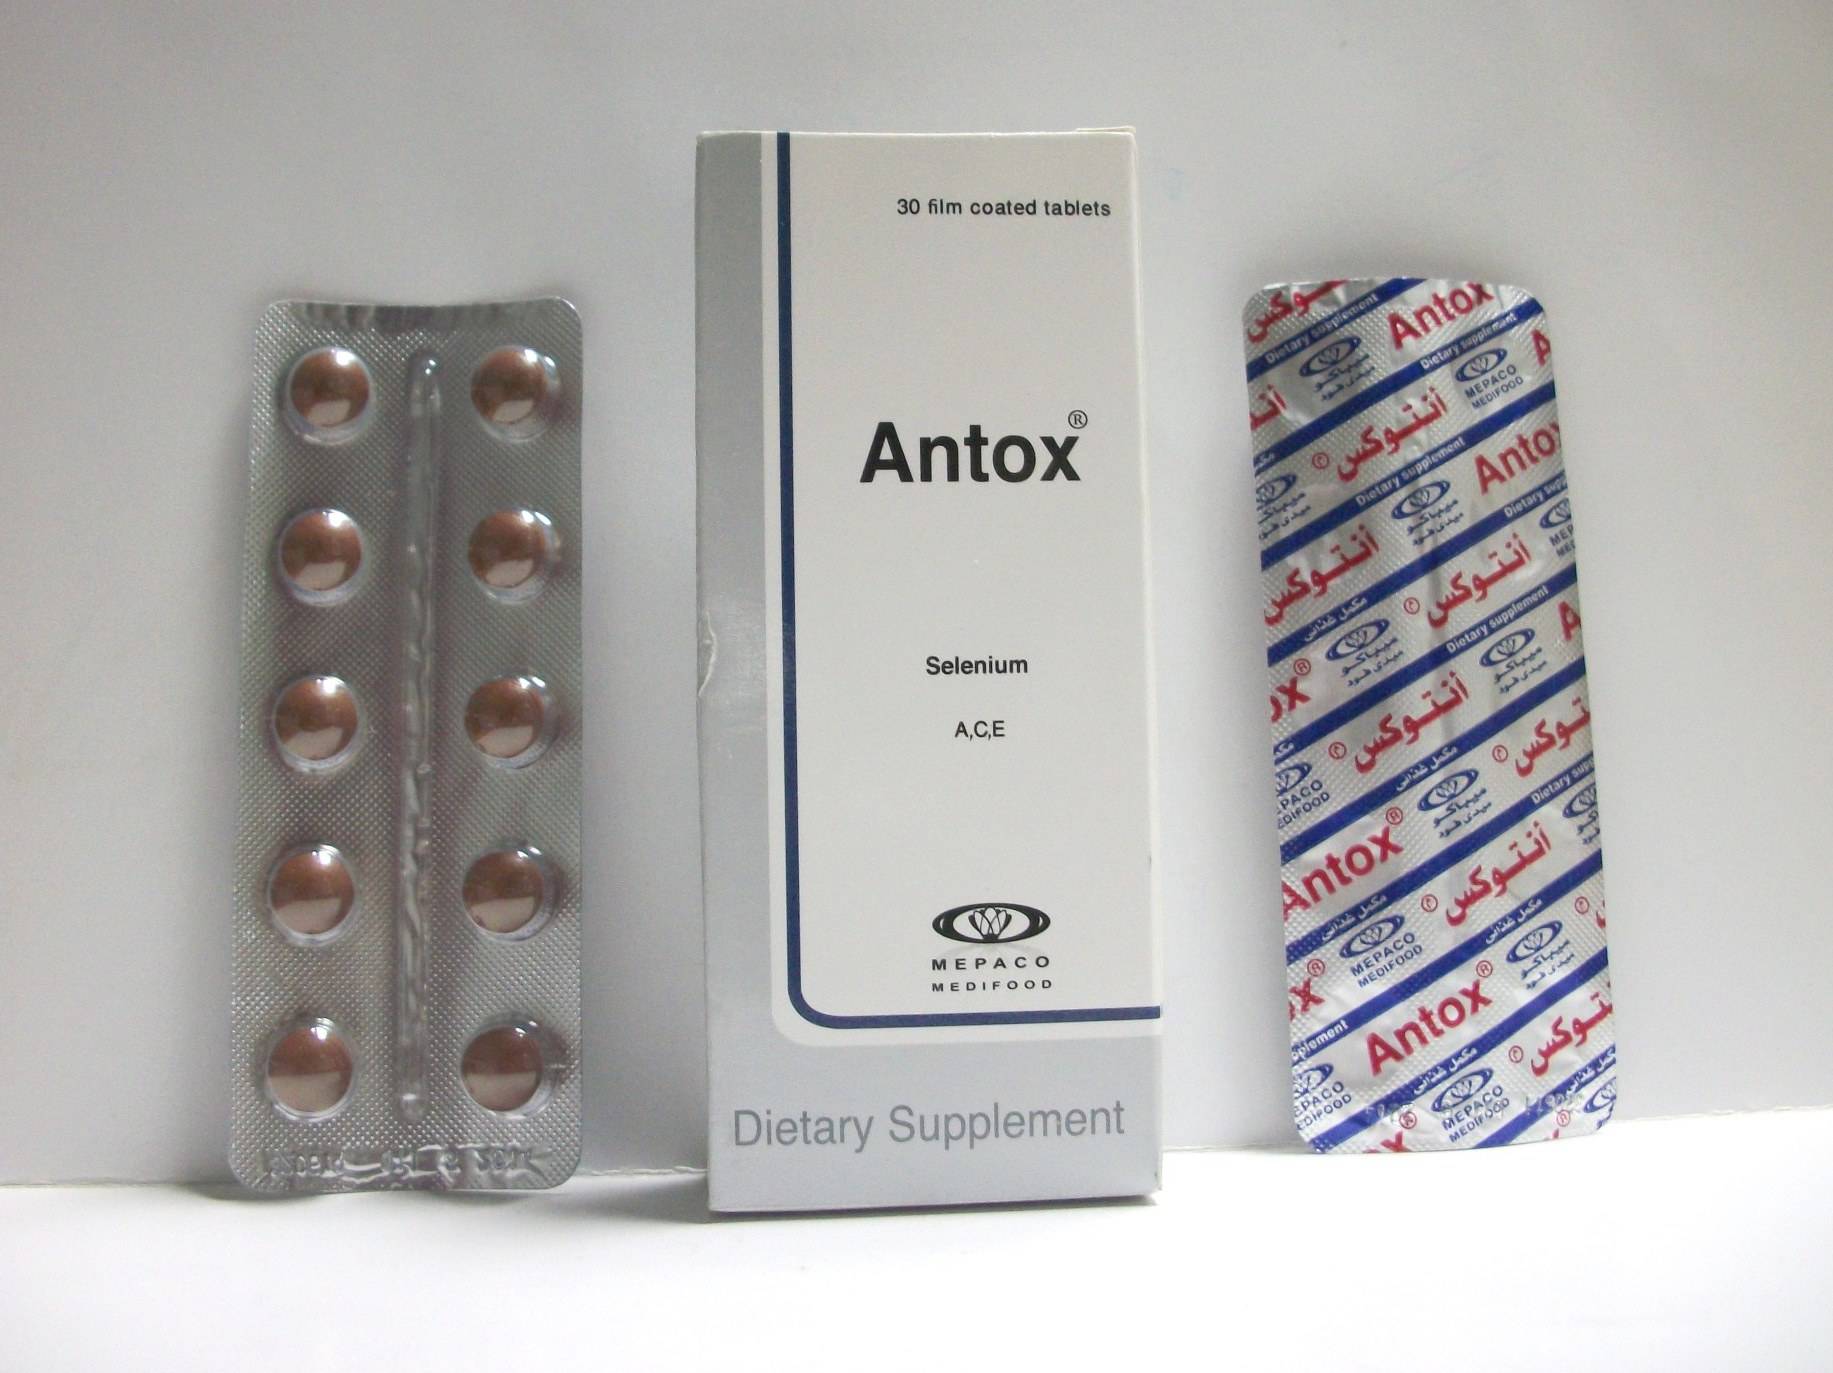 Antox - Tablets